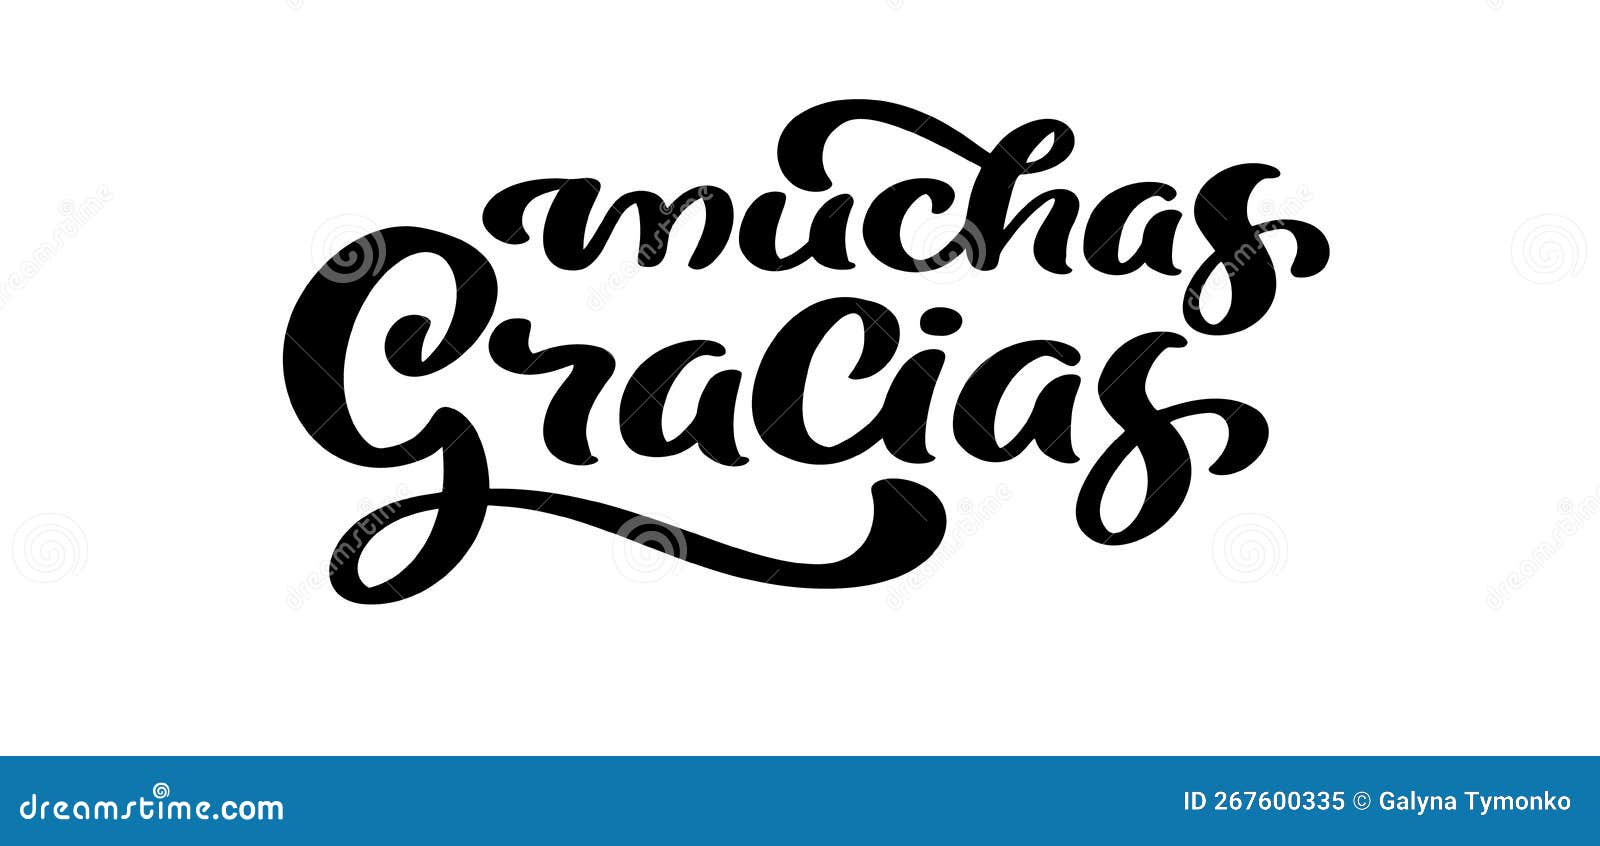 Thank You Vector Lettering Text In Spanish Muchas Gracias. Hand Drawn ...